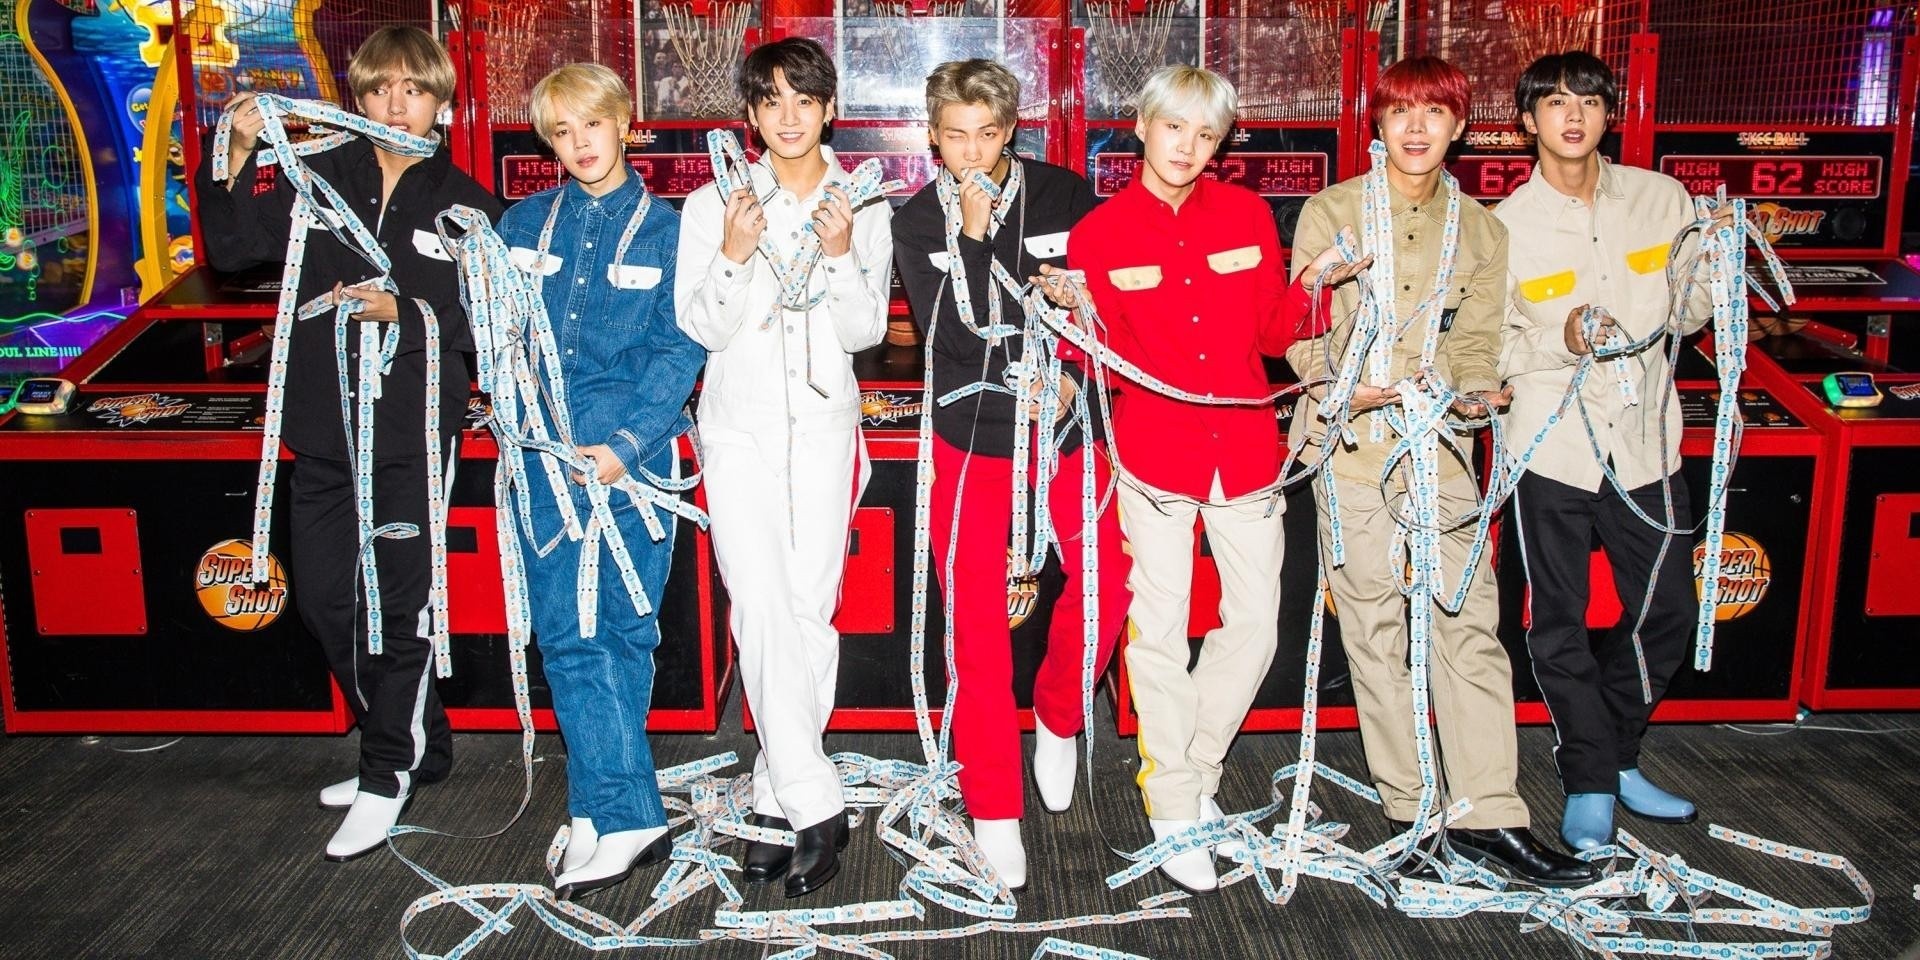 Scalpers reselling tickets to BTS' sold out Singapore show for exorbitant prices